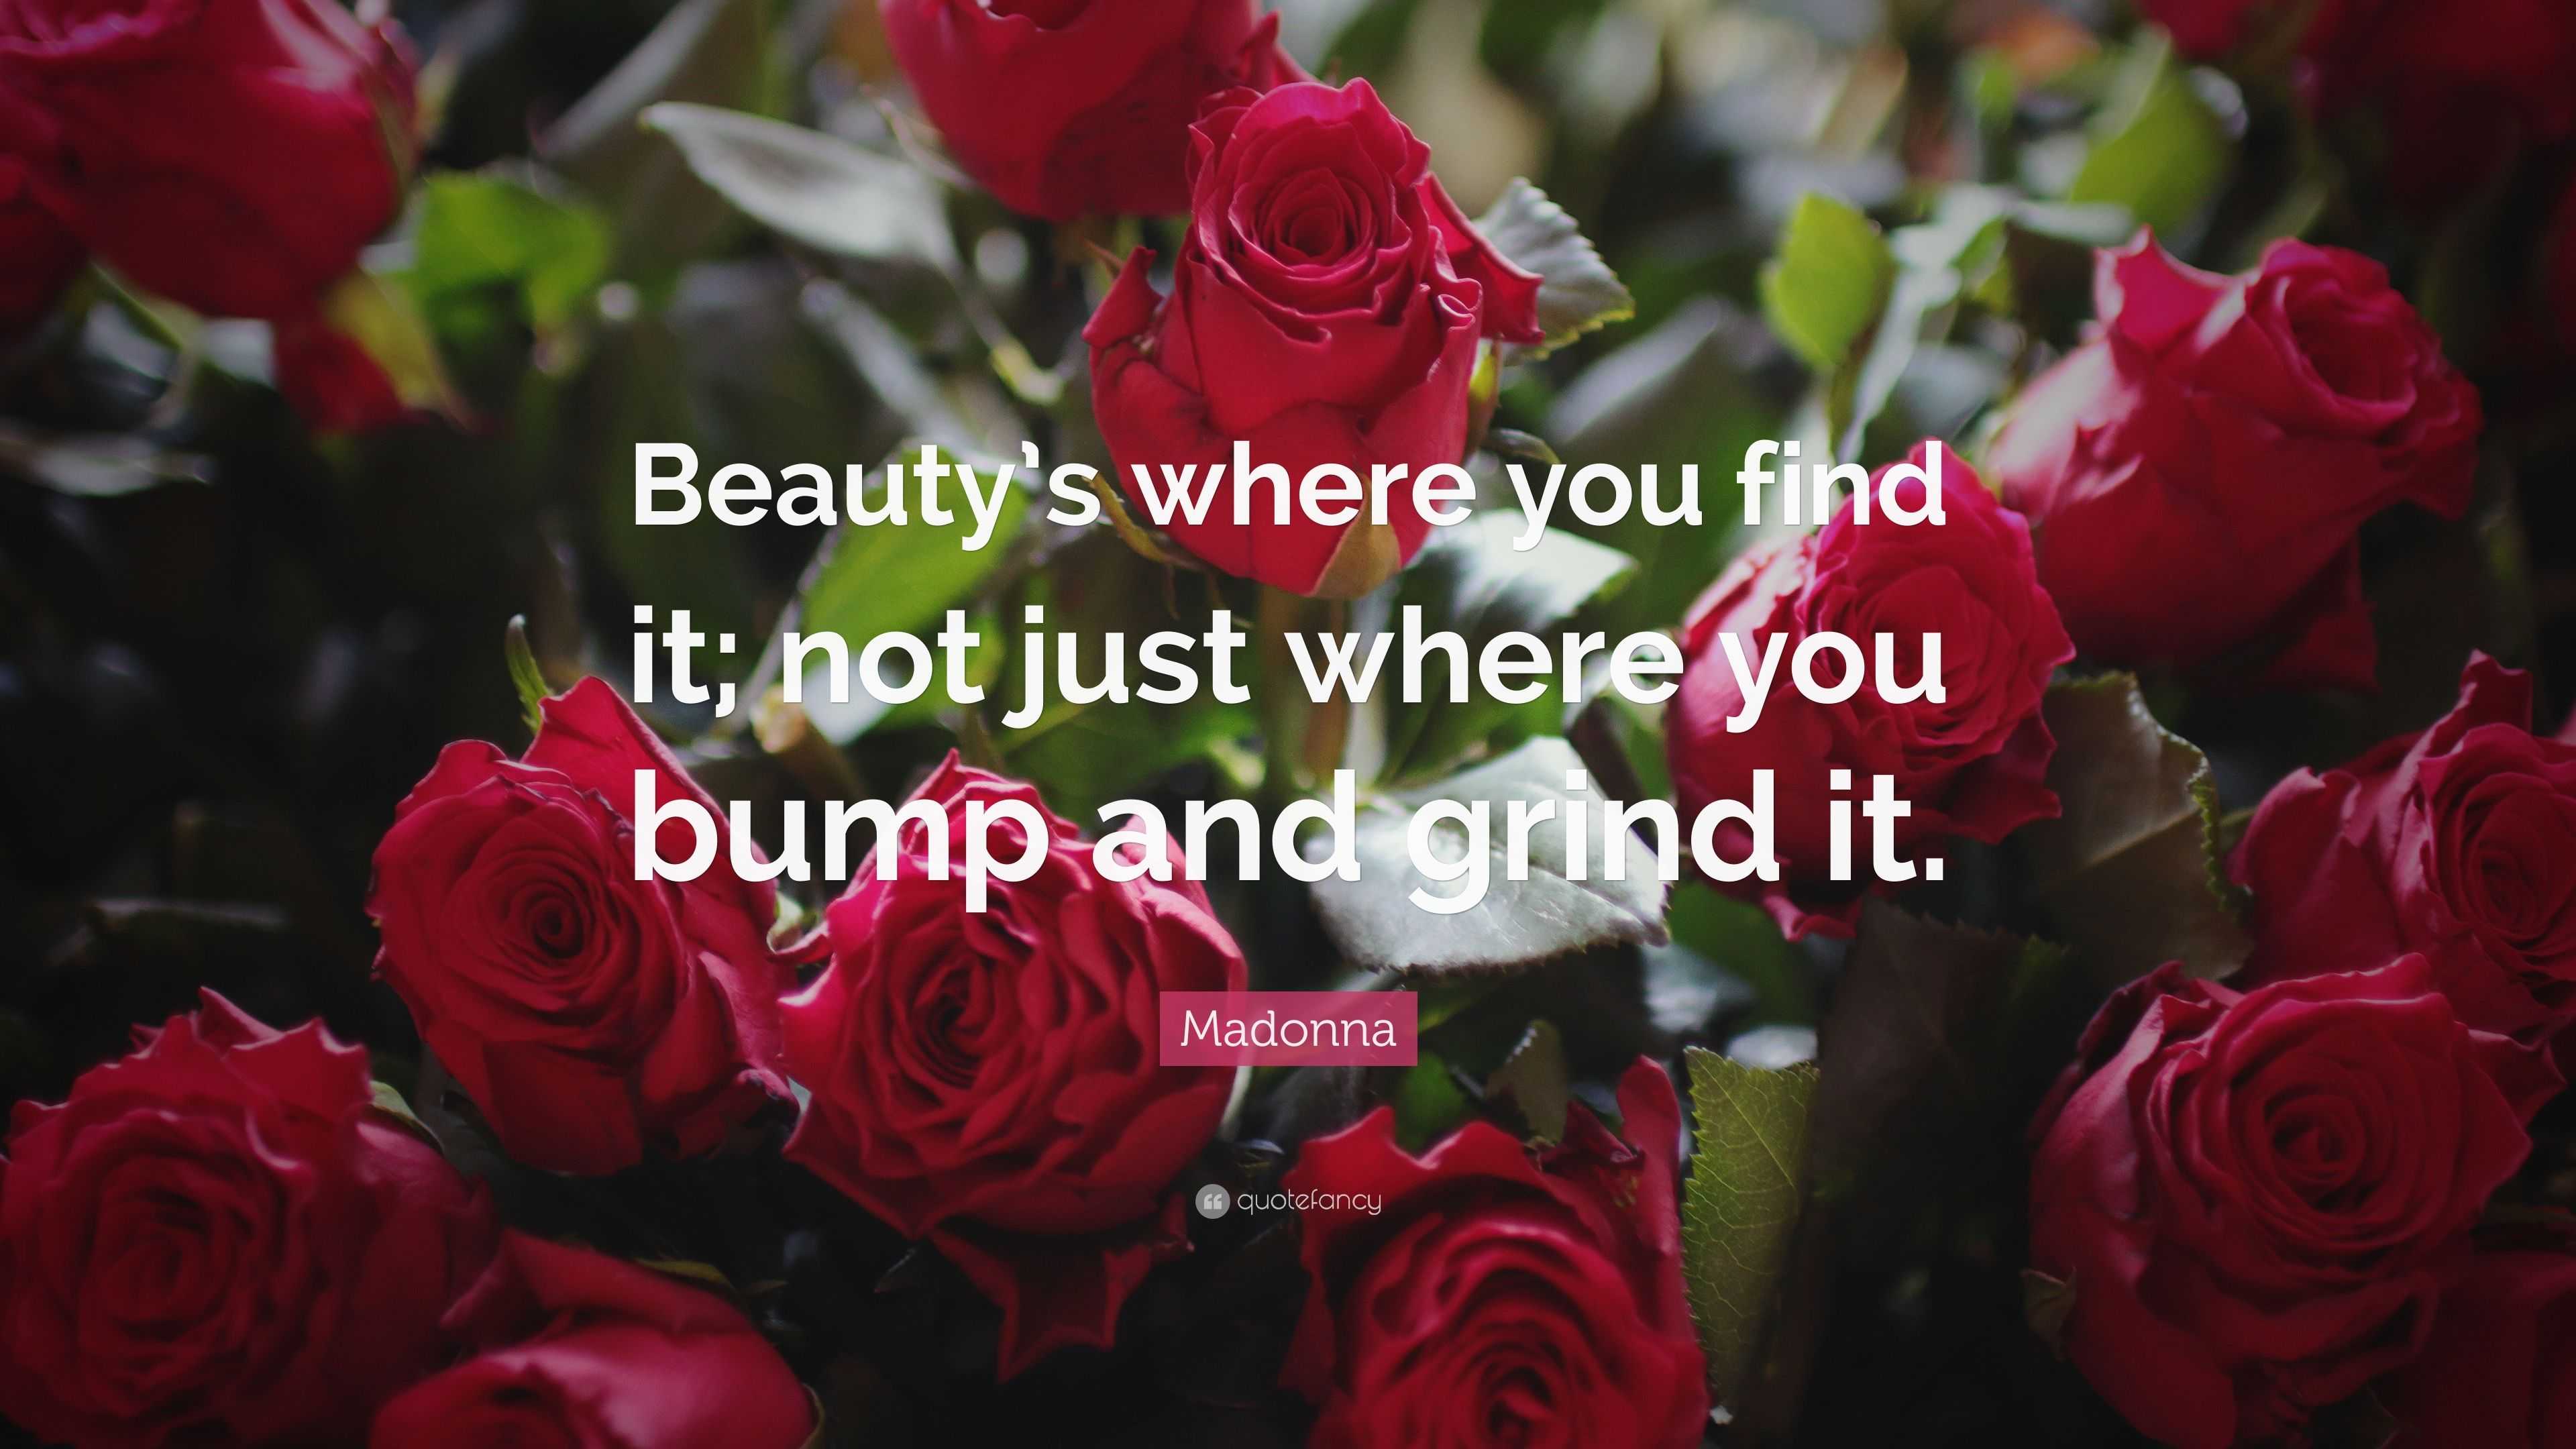 Madonna Quote: “Beauty’s where you find it; not just where you bump and ...